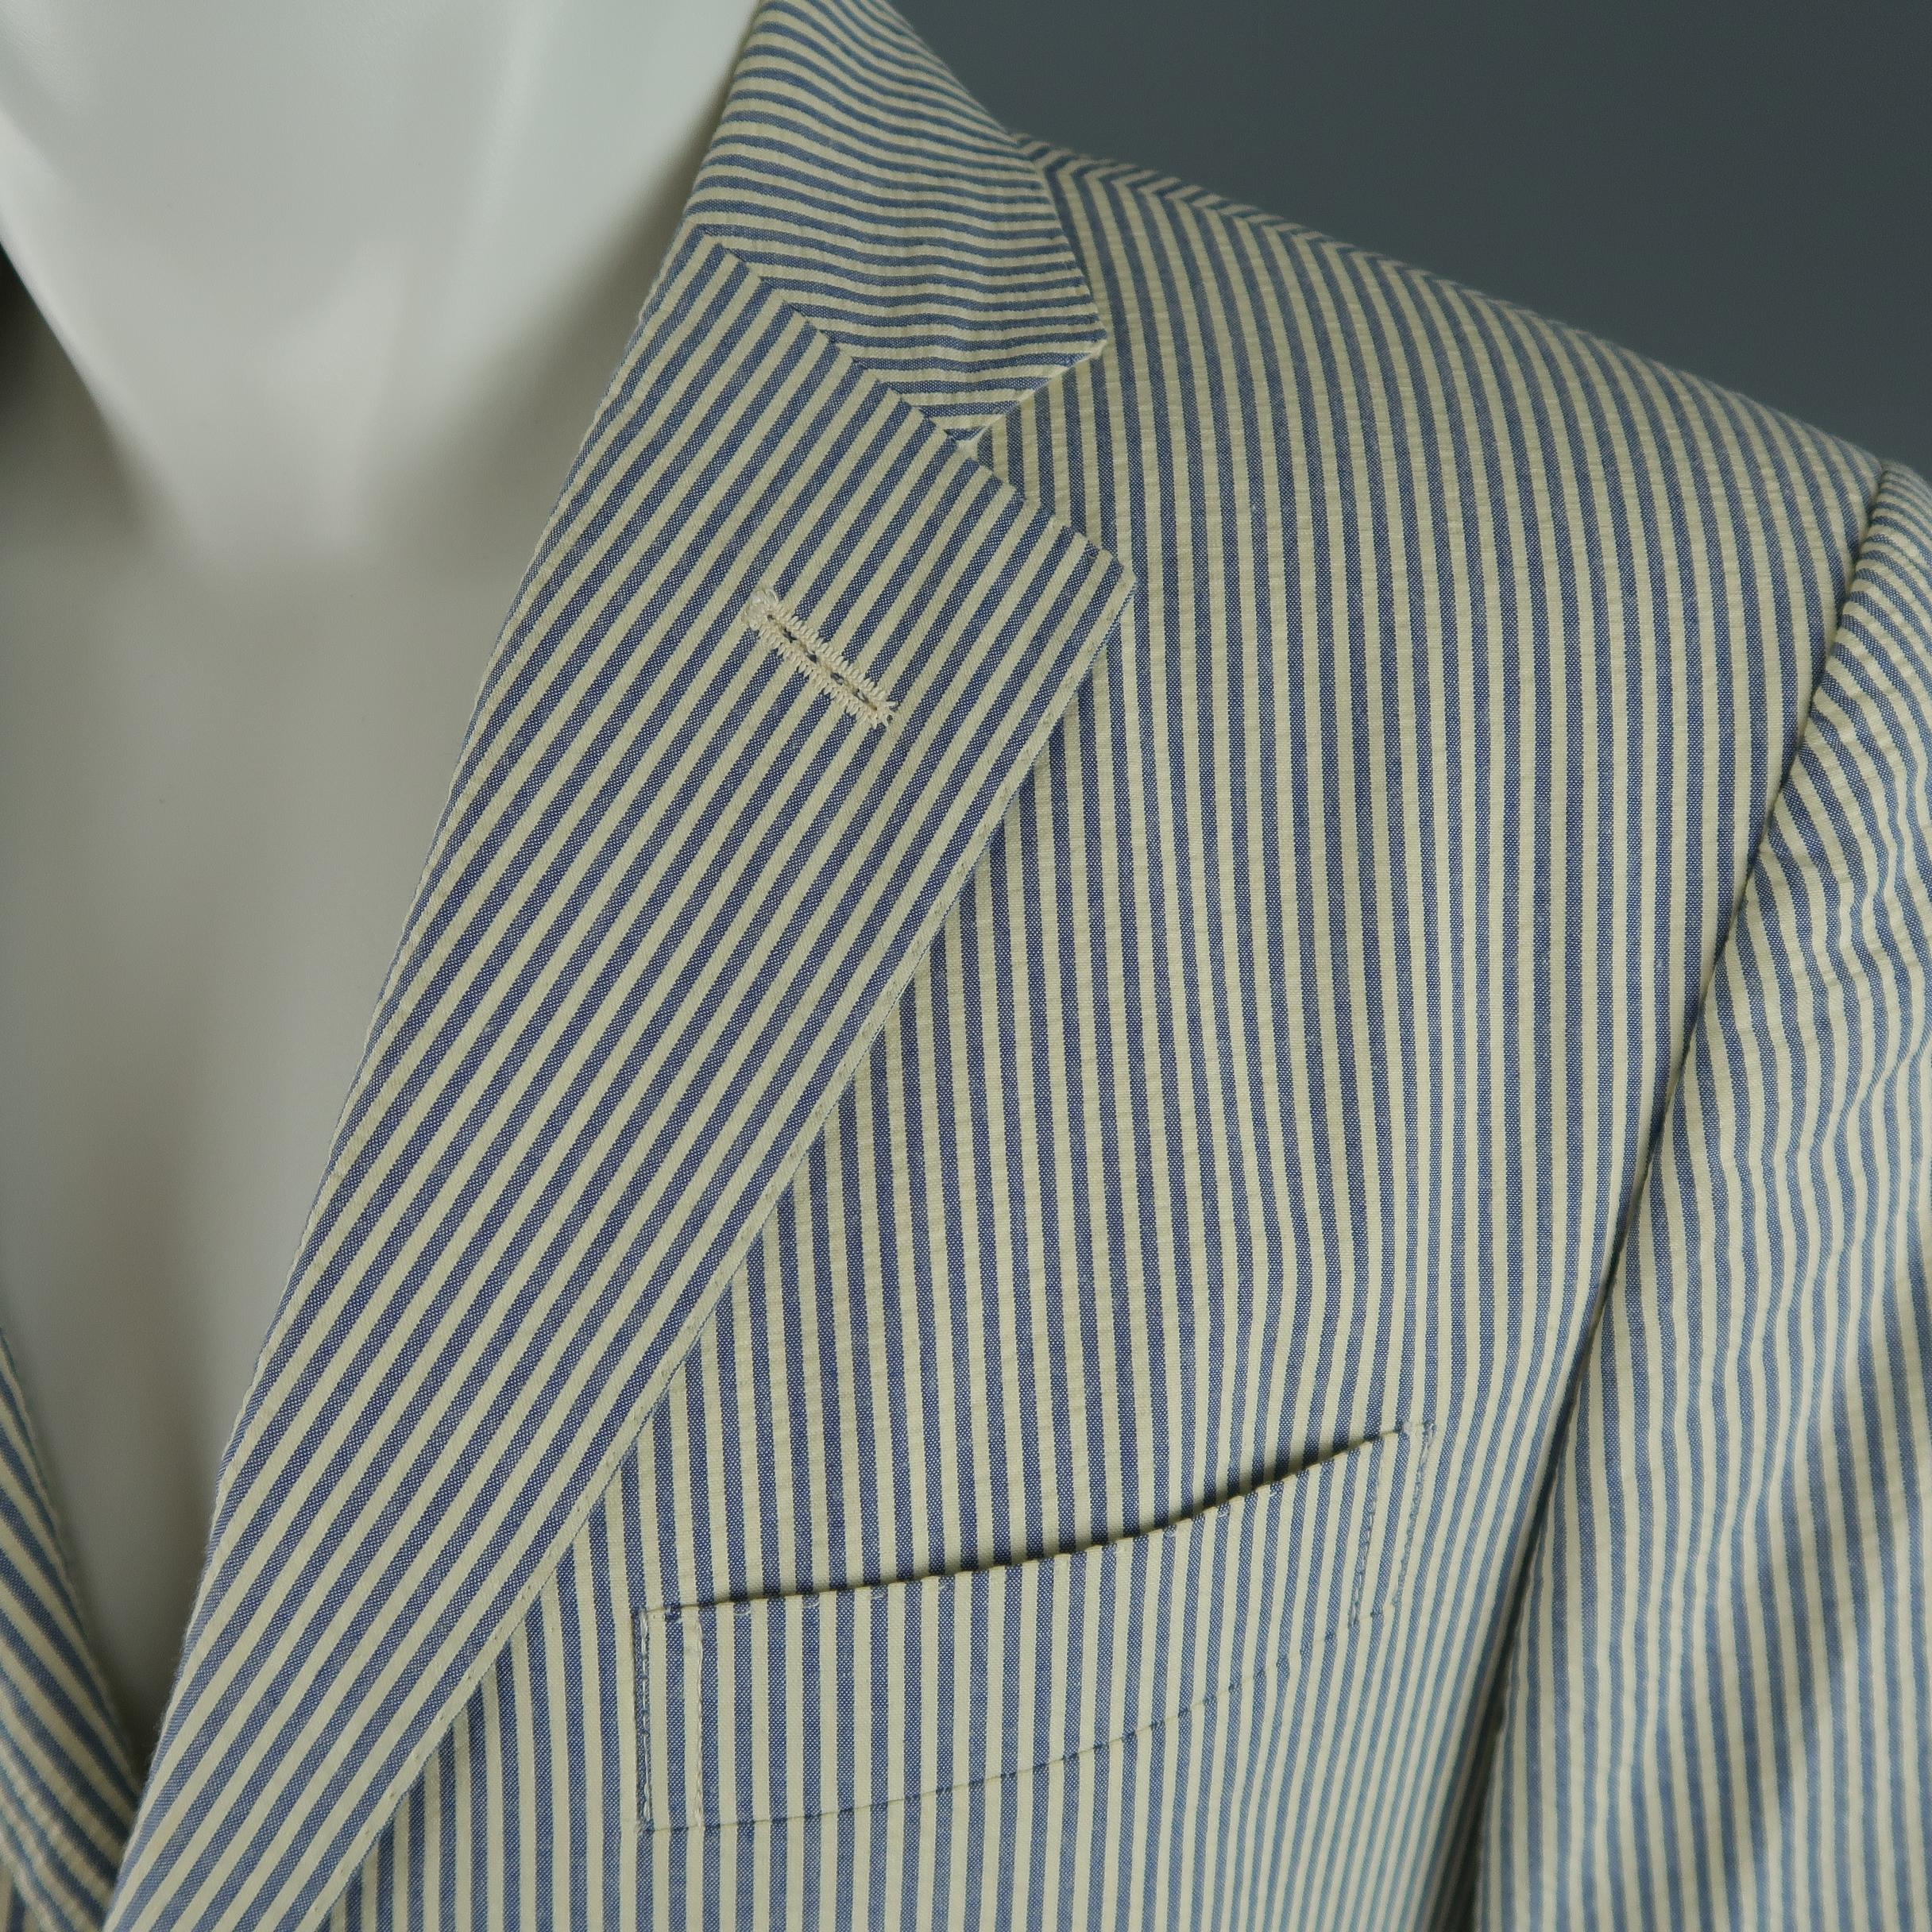 POLO RALPH LAUREN sport coat comes in cream and blue striped seersucker with a notch lapel, three button, single breasted front, and flap pockets. Made in Italy.
 
Excellent Pre-Owned Condition.
Marked: 40
 
Measurements:
 
Shoulder: 18 in.
Chest: